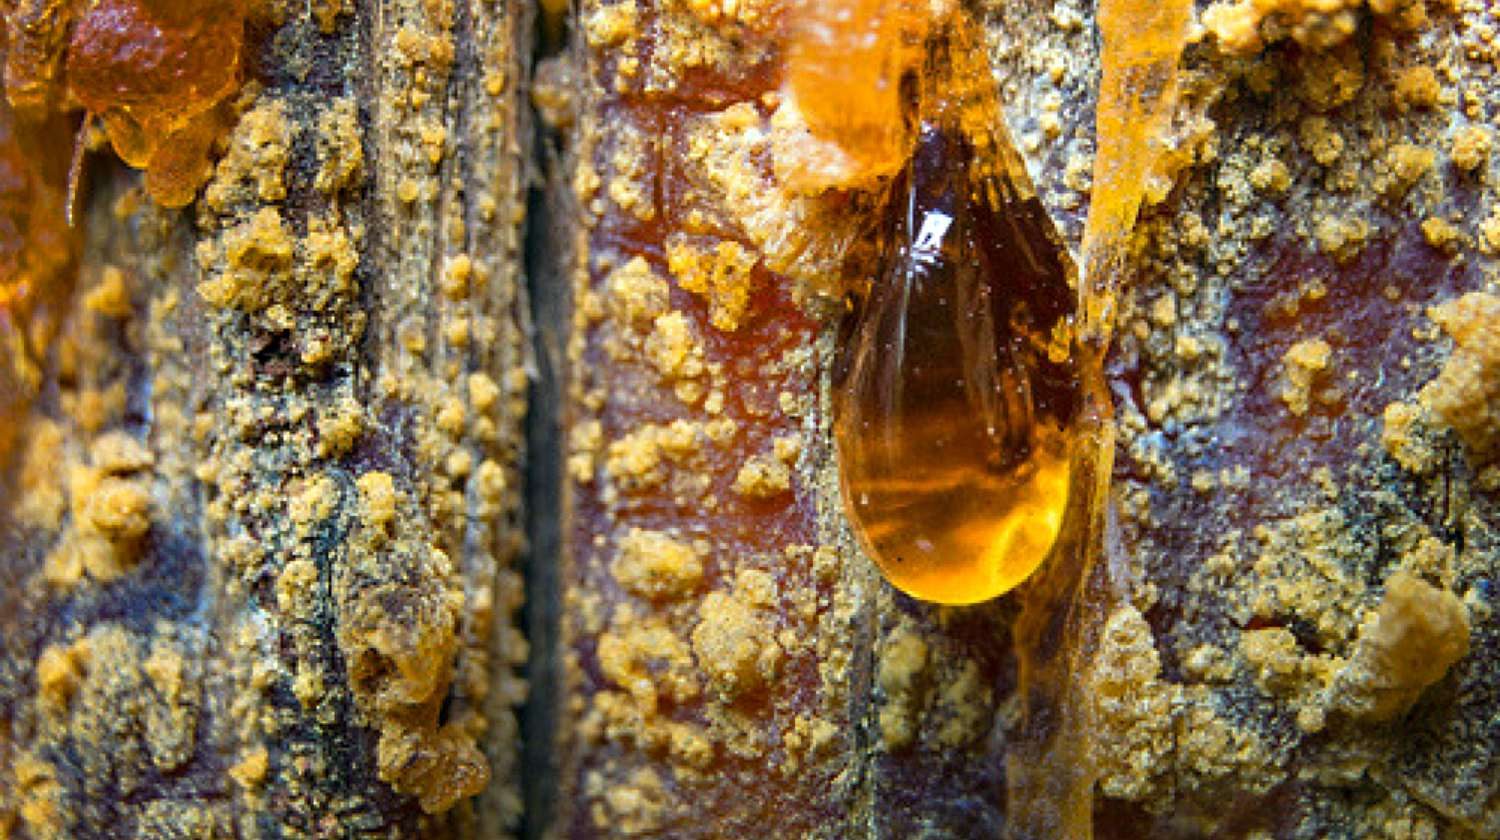 Feature | Amber pitch on bark of a tree trunk | Survival Uses Of Pine Resin